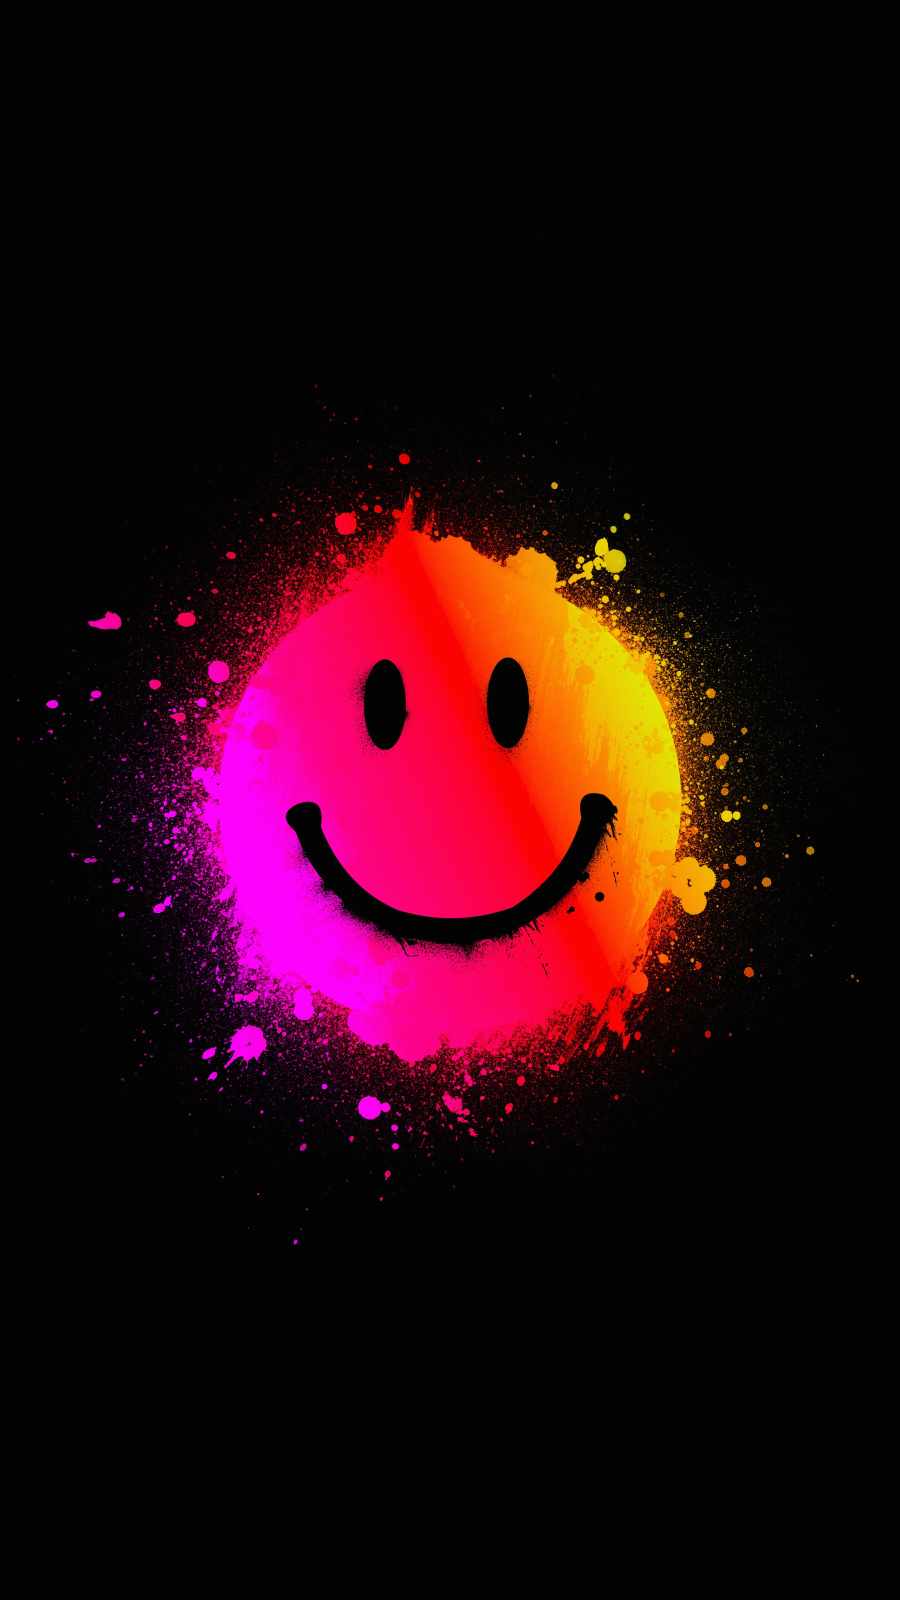 Smiling IPhone Wallpaper - IPhone Wallpapers : iPhone Wallpapers